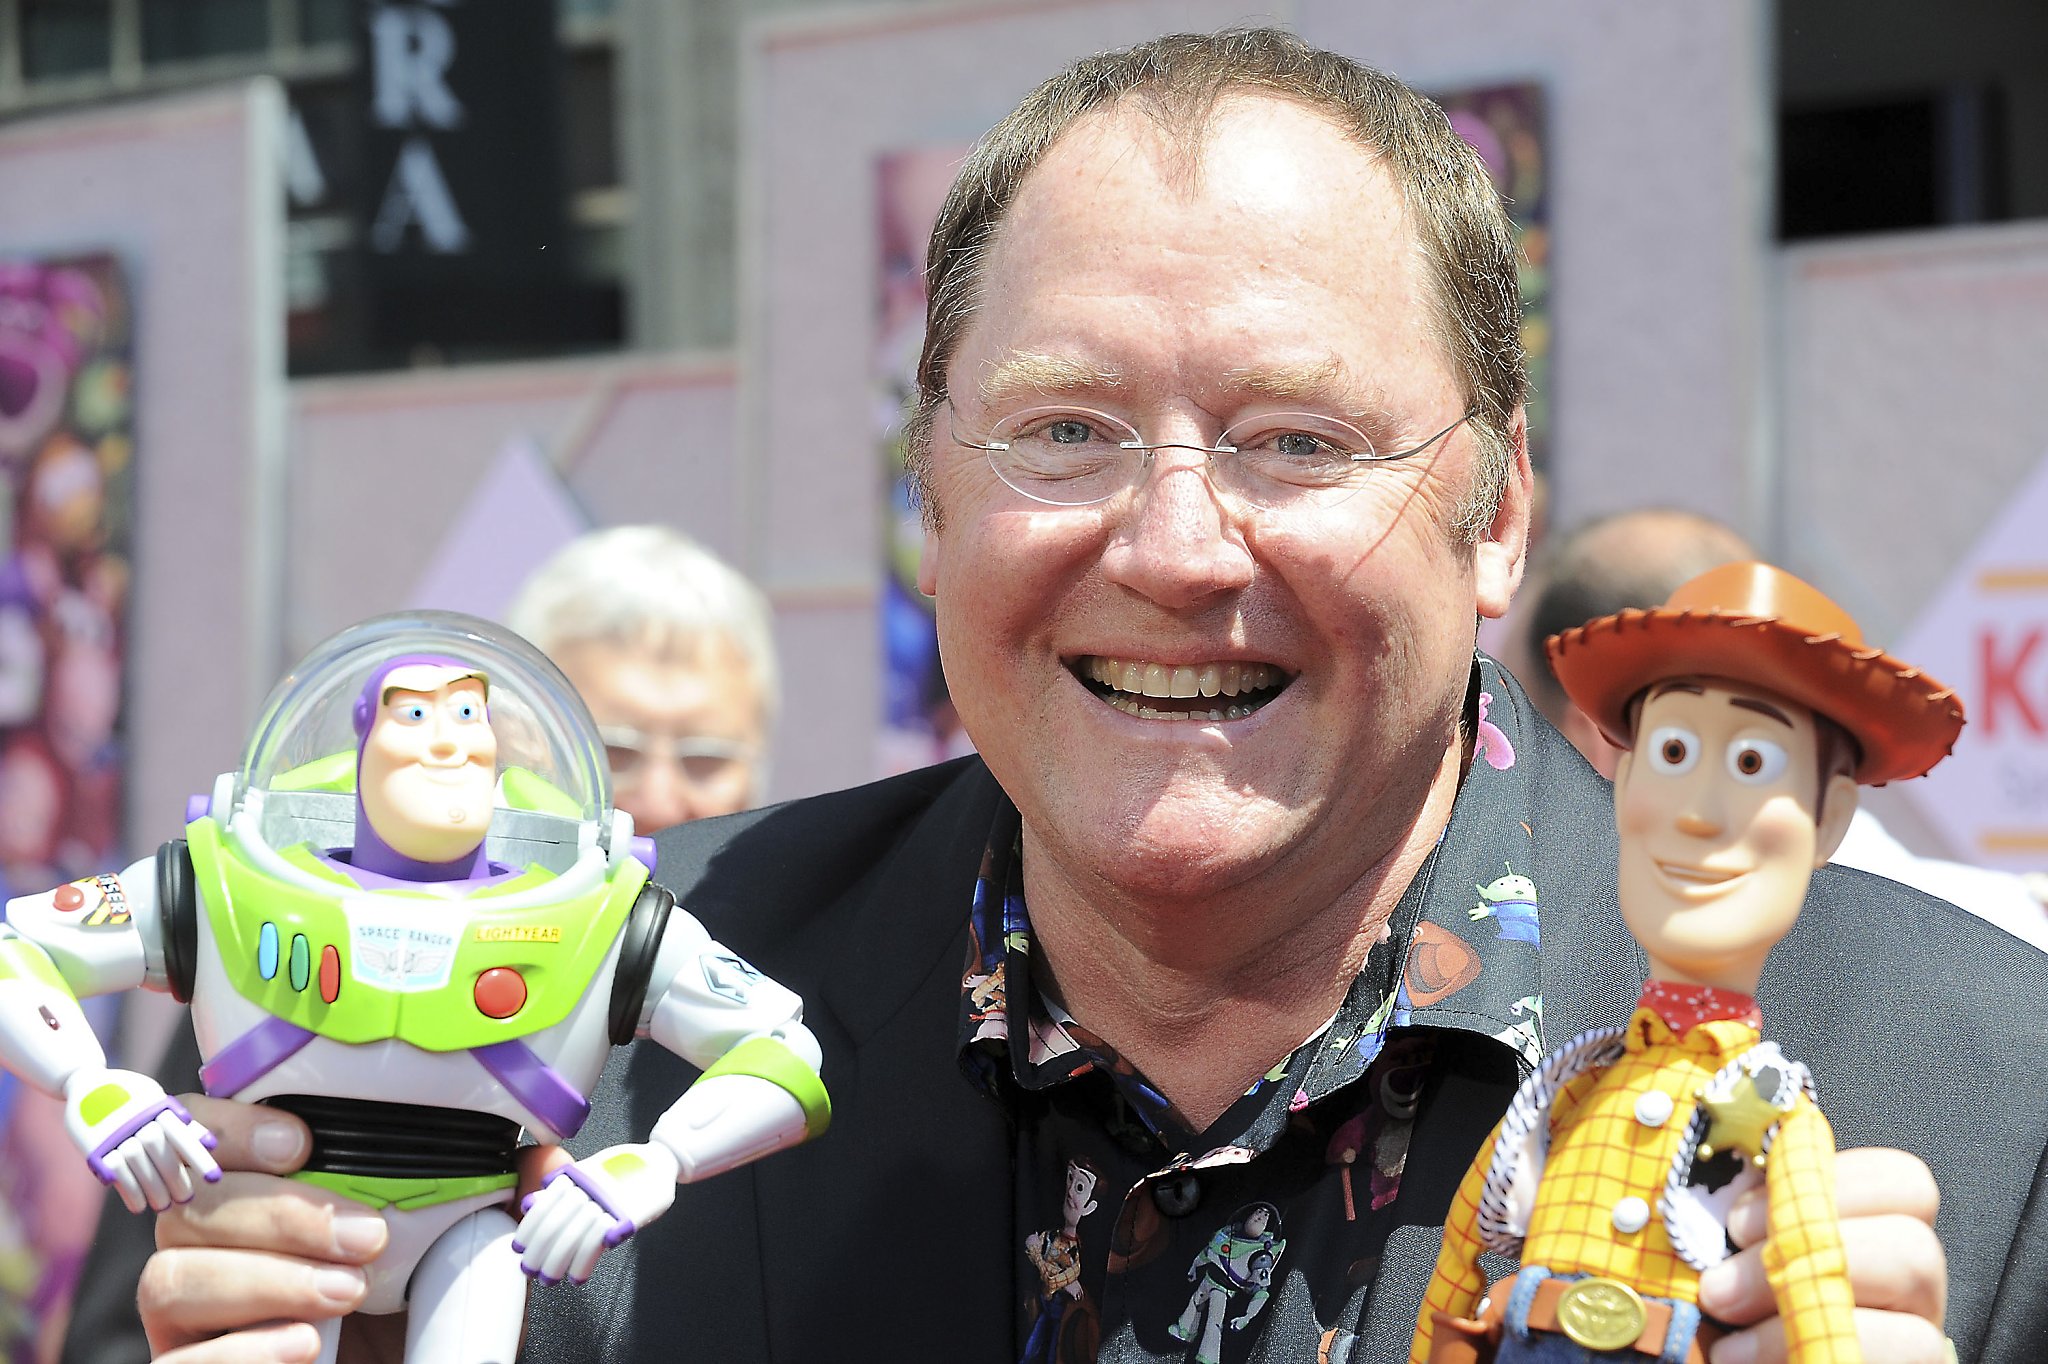 John Lasseter Creative Chief At Pixar And Disney To Leave At End Of